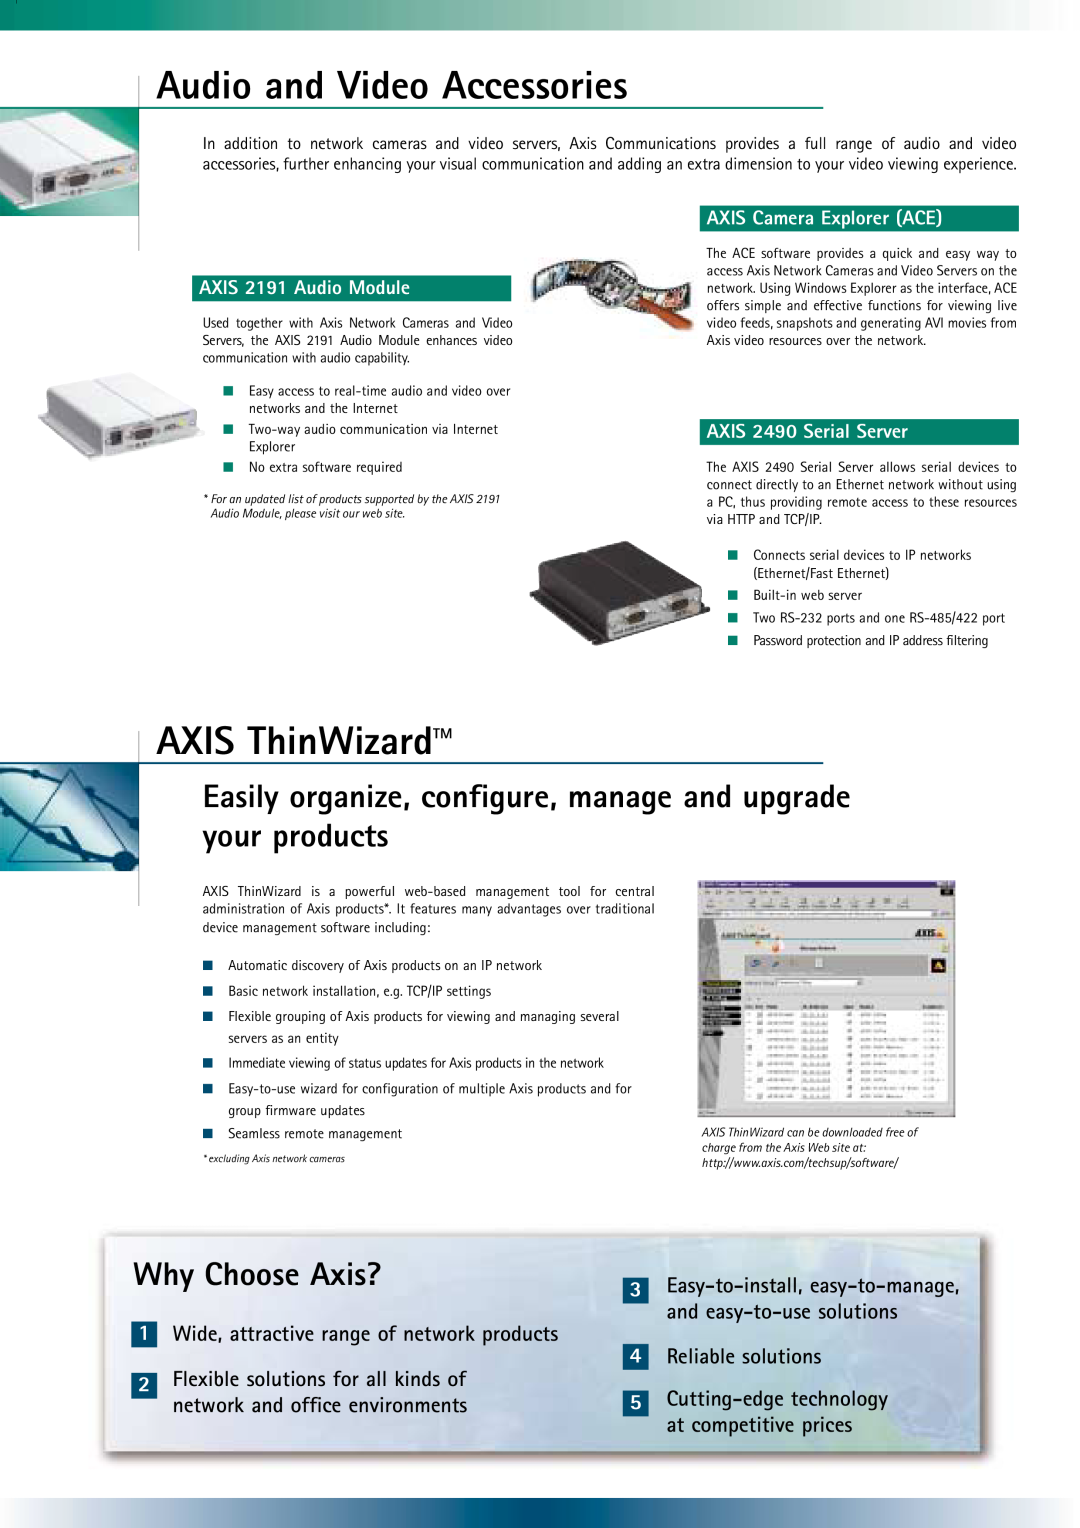 Axis Communications RJ45 Audio and Video Accessories, AXIS ThinWizardTM, AXIS 2191 Audio Module, AXIS Camera Explorer ACE 